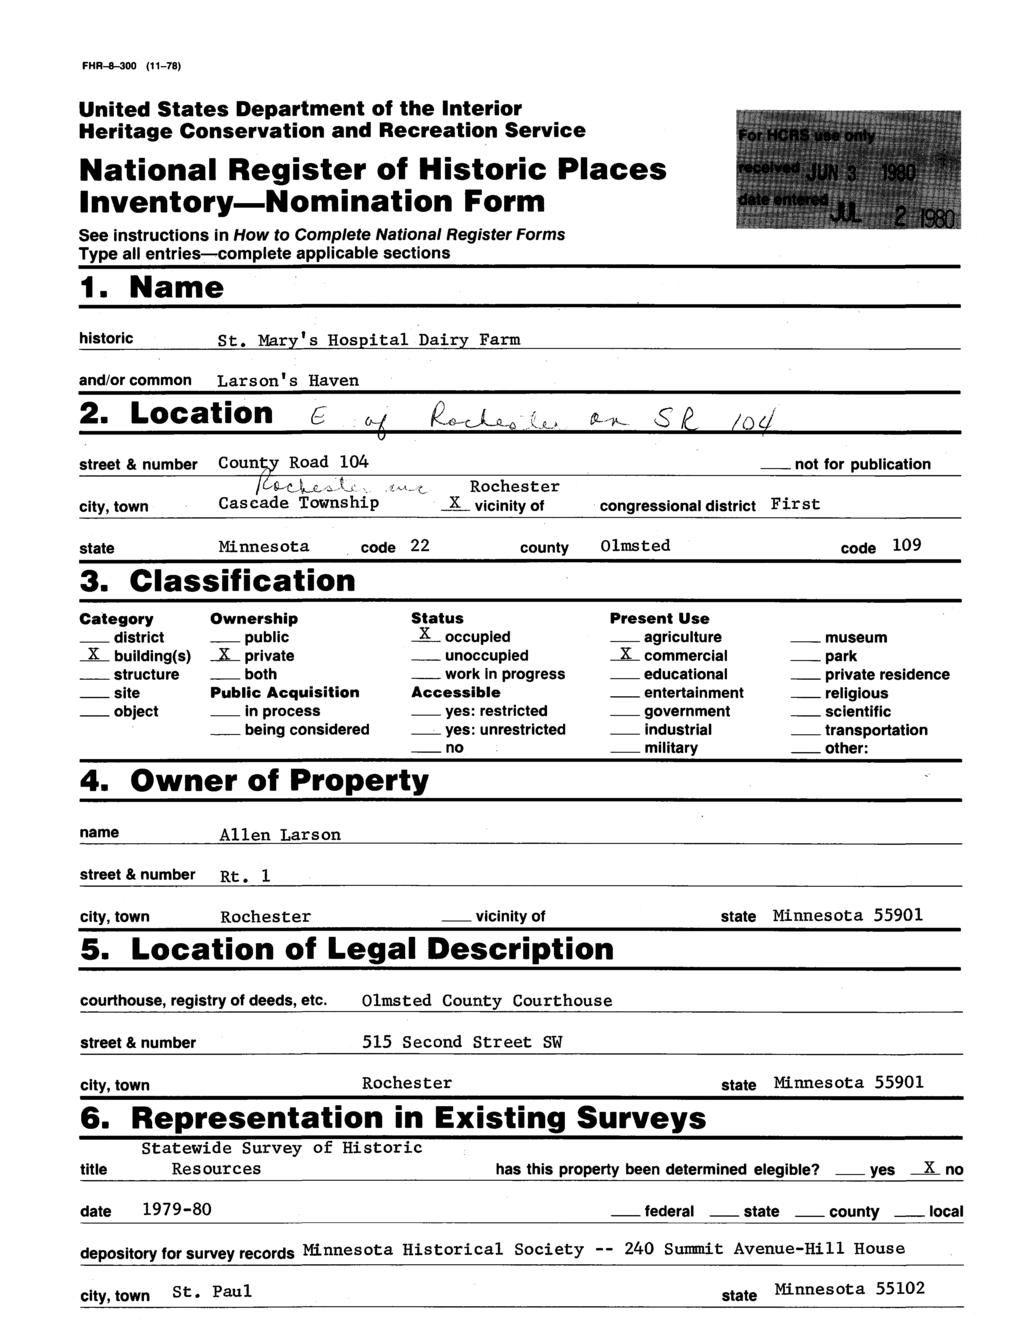 FHR-8-300 (11-78) United States Department of the nterior Heritage Conservation and Recreation Service National Register of Historic Places nventory Nomination Form See instructions in How to